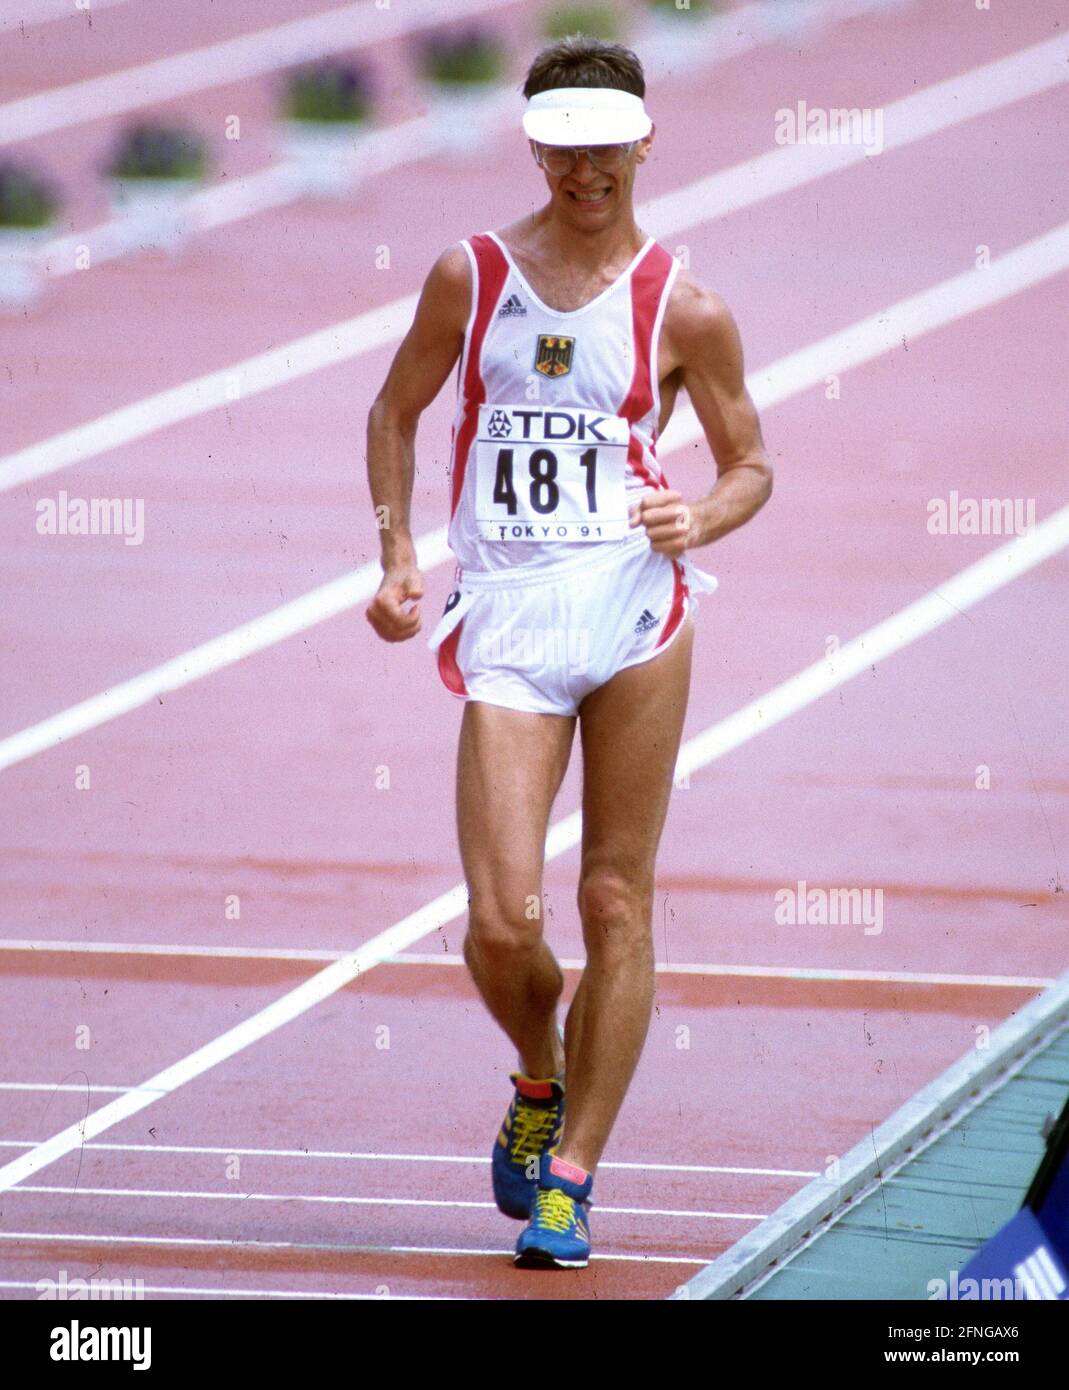 Former walker Hartwig GAUDER has died at the age of 65. Archive photo: Athletics: Hartwig Gauder , Germany, Olympic walker champion 1980, here at the 1991 World Championships in Athletics in Tokyo, where he finished third (3rd) on 31/08/1991. [automated translation] Stock Photo